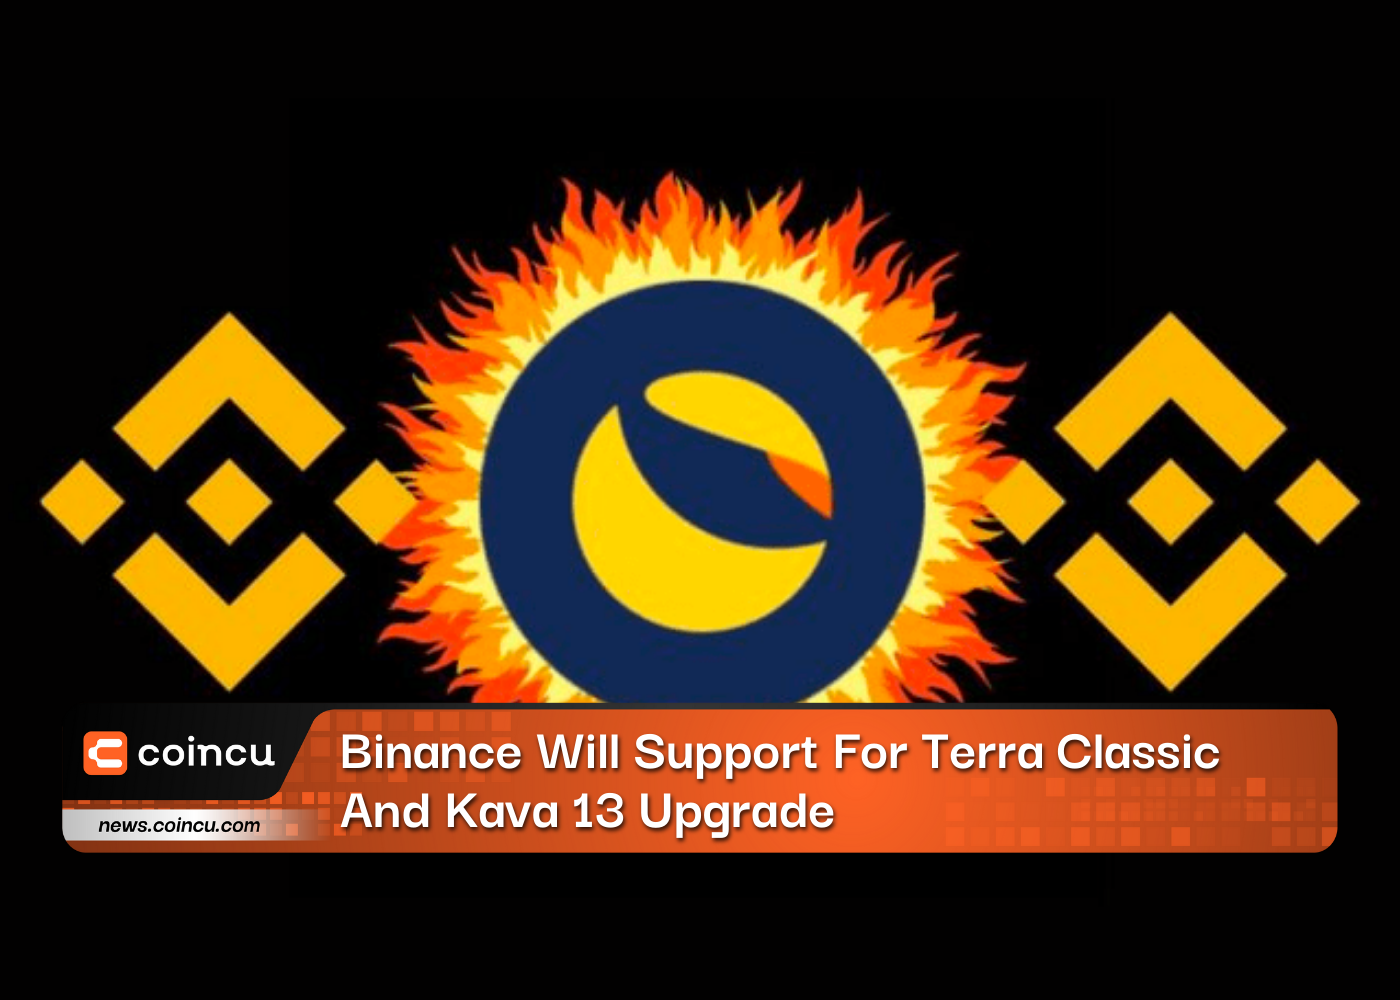 Binance Will Support For Terra Classic And Kava 13 Upgrade